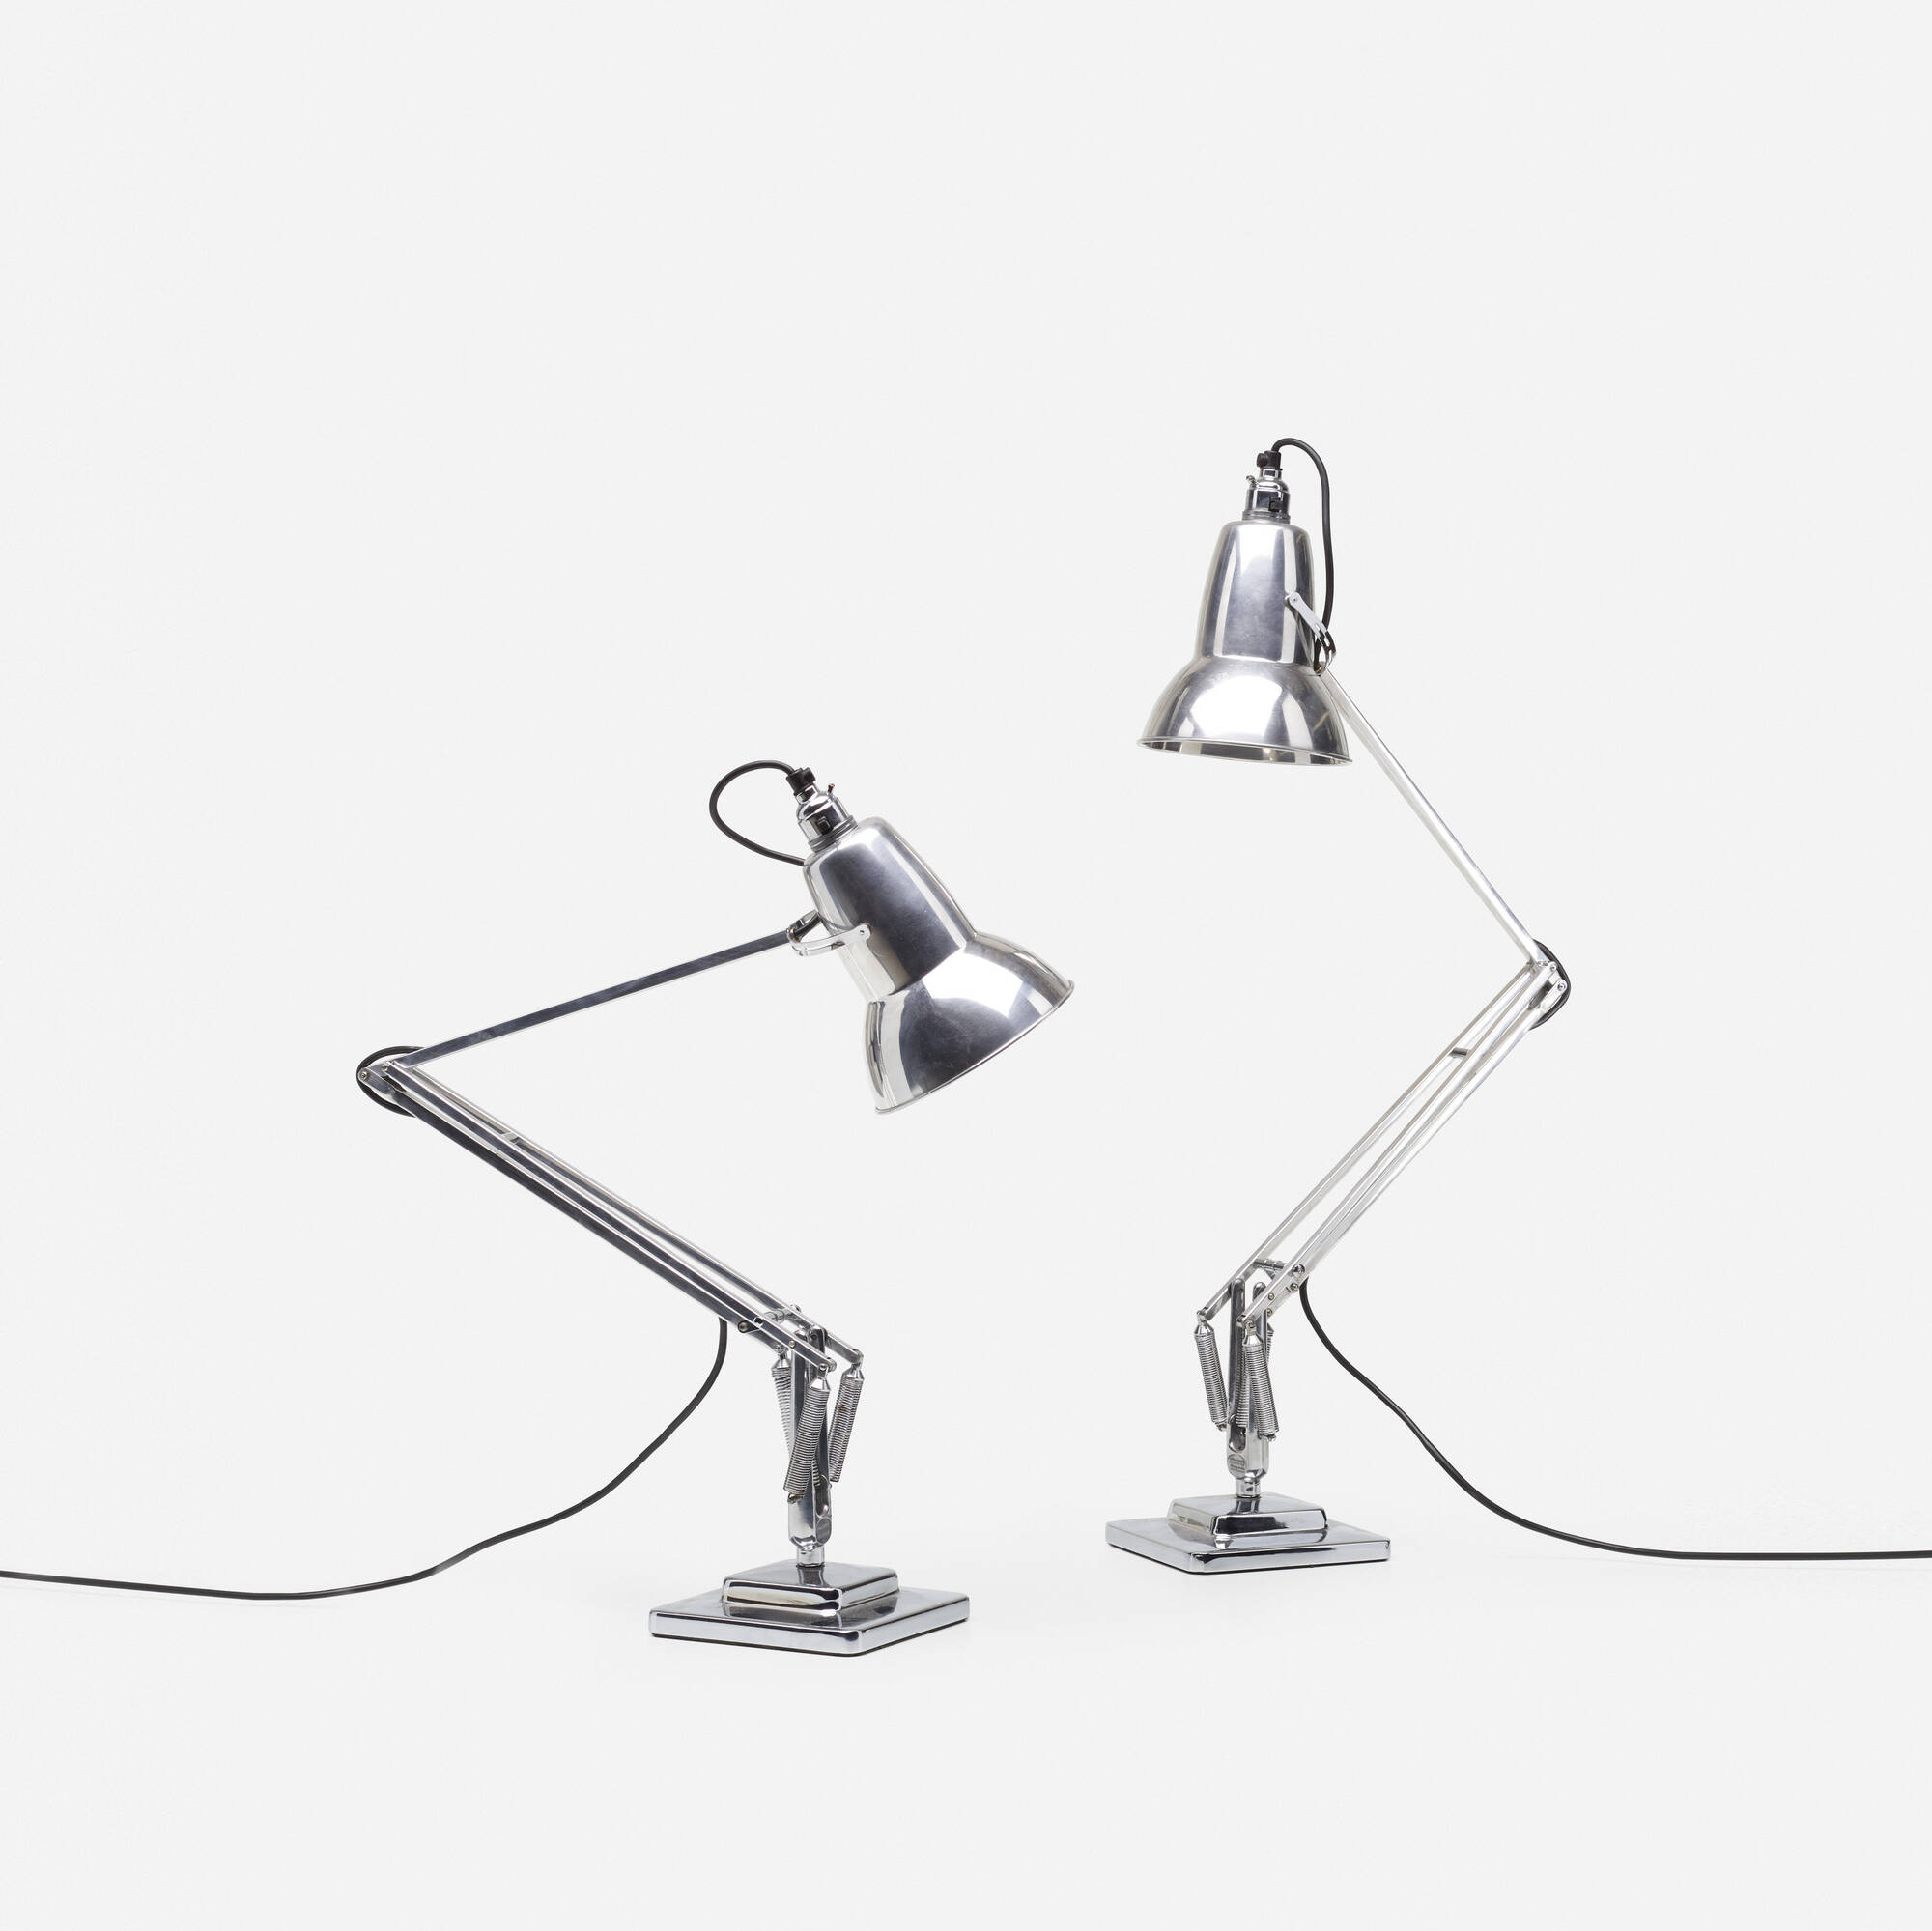 333: GEORGE CARWARDINE, Anglepoise lamps, pair < Art + Design, 18 January 2018 | Wright: Auctions of Art and Design